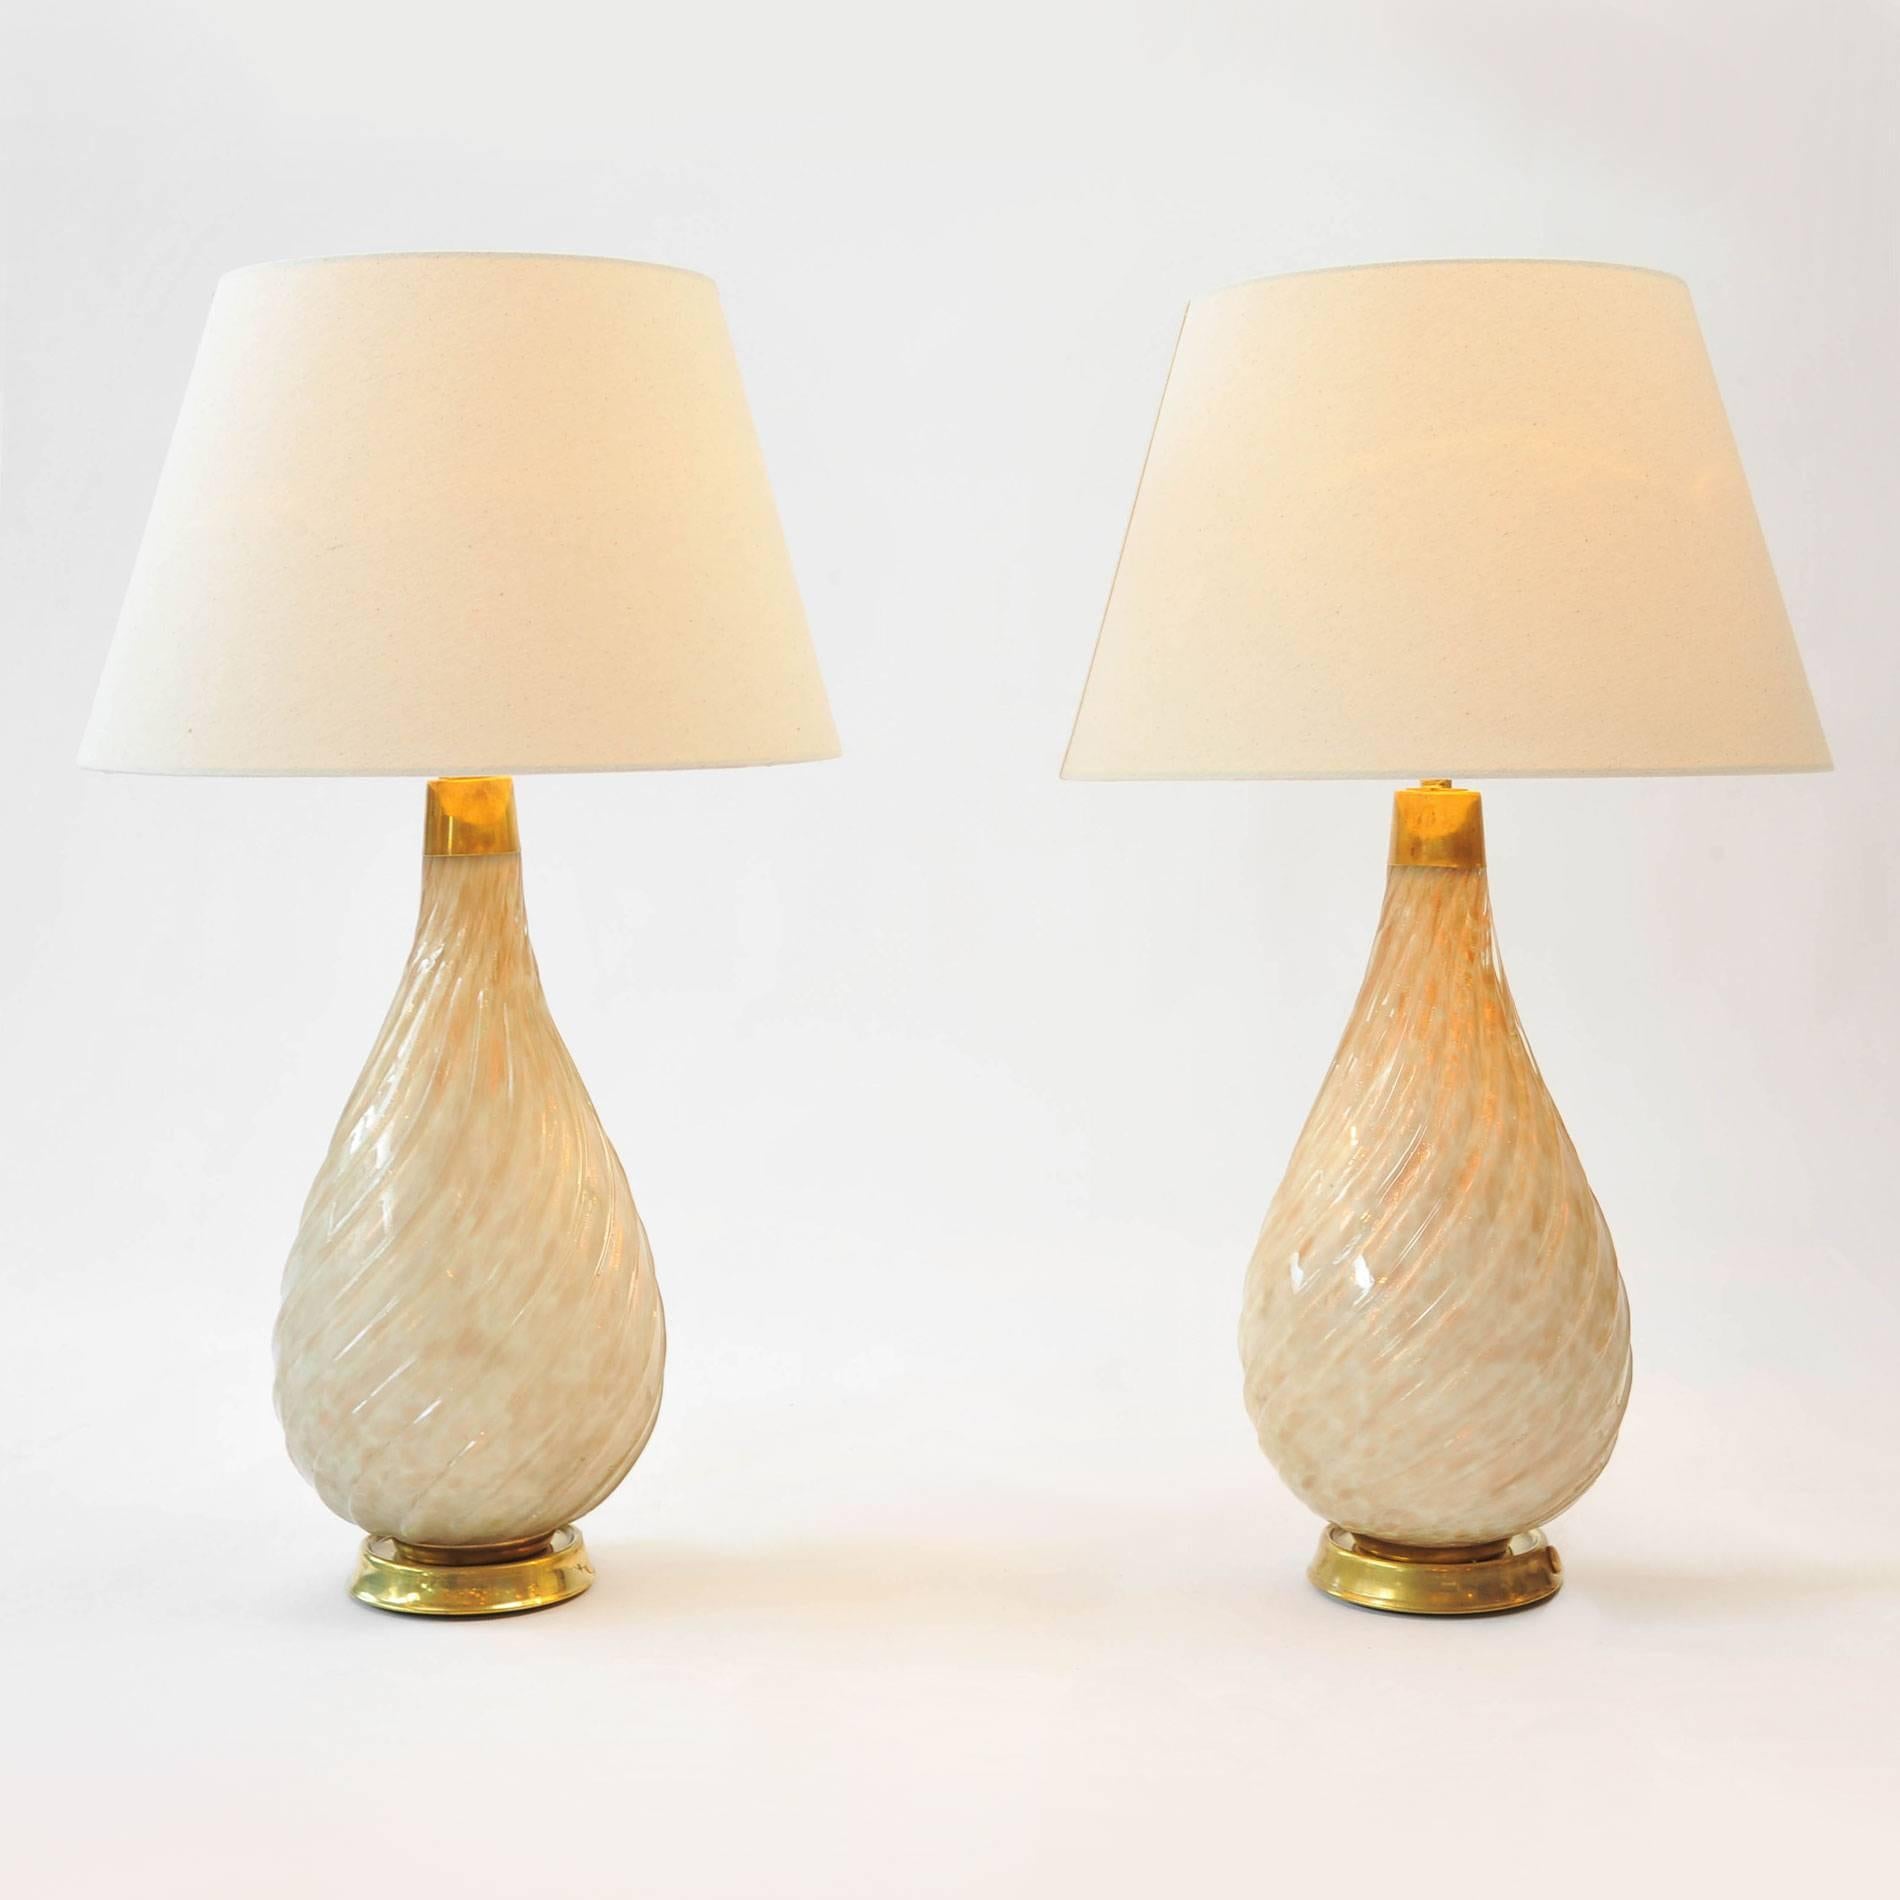 Contemporary table lamps of iridescent fluted glass on circular brass bases.

The dimensions below are those of the each lamp only. The shades are 8.75 inches high.